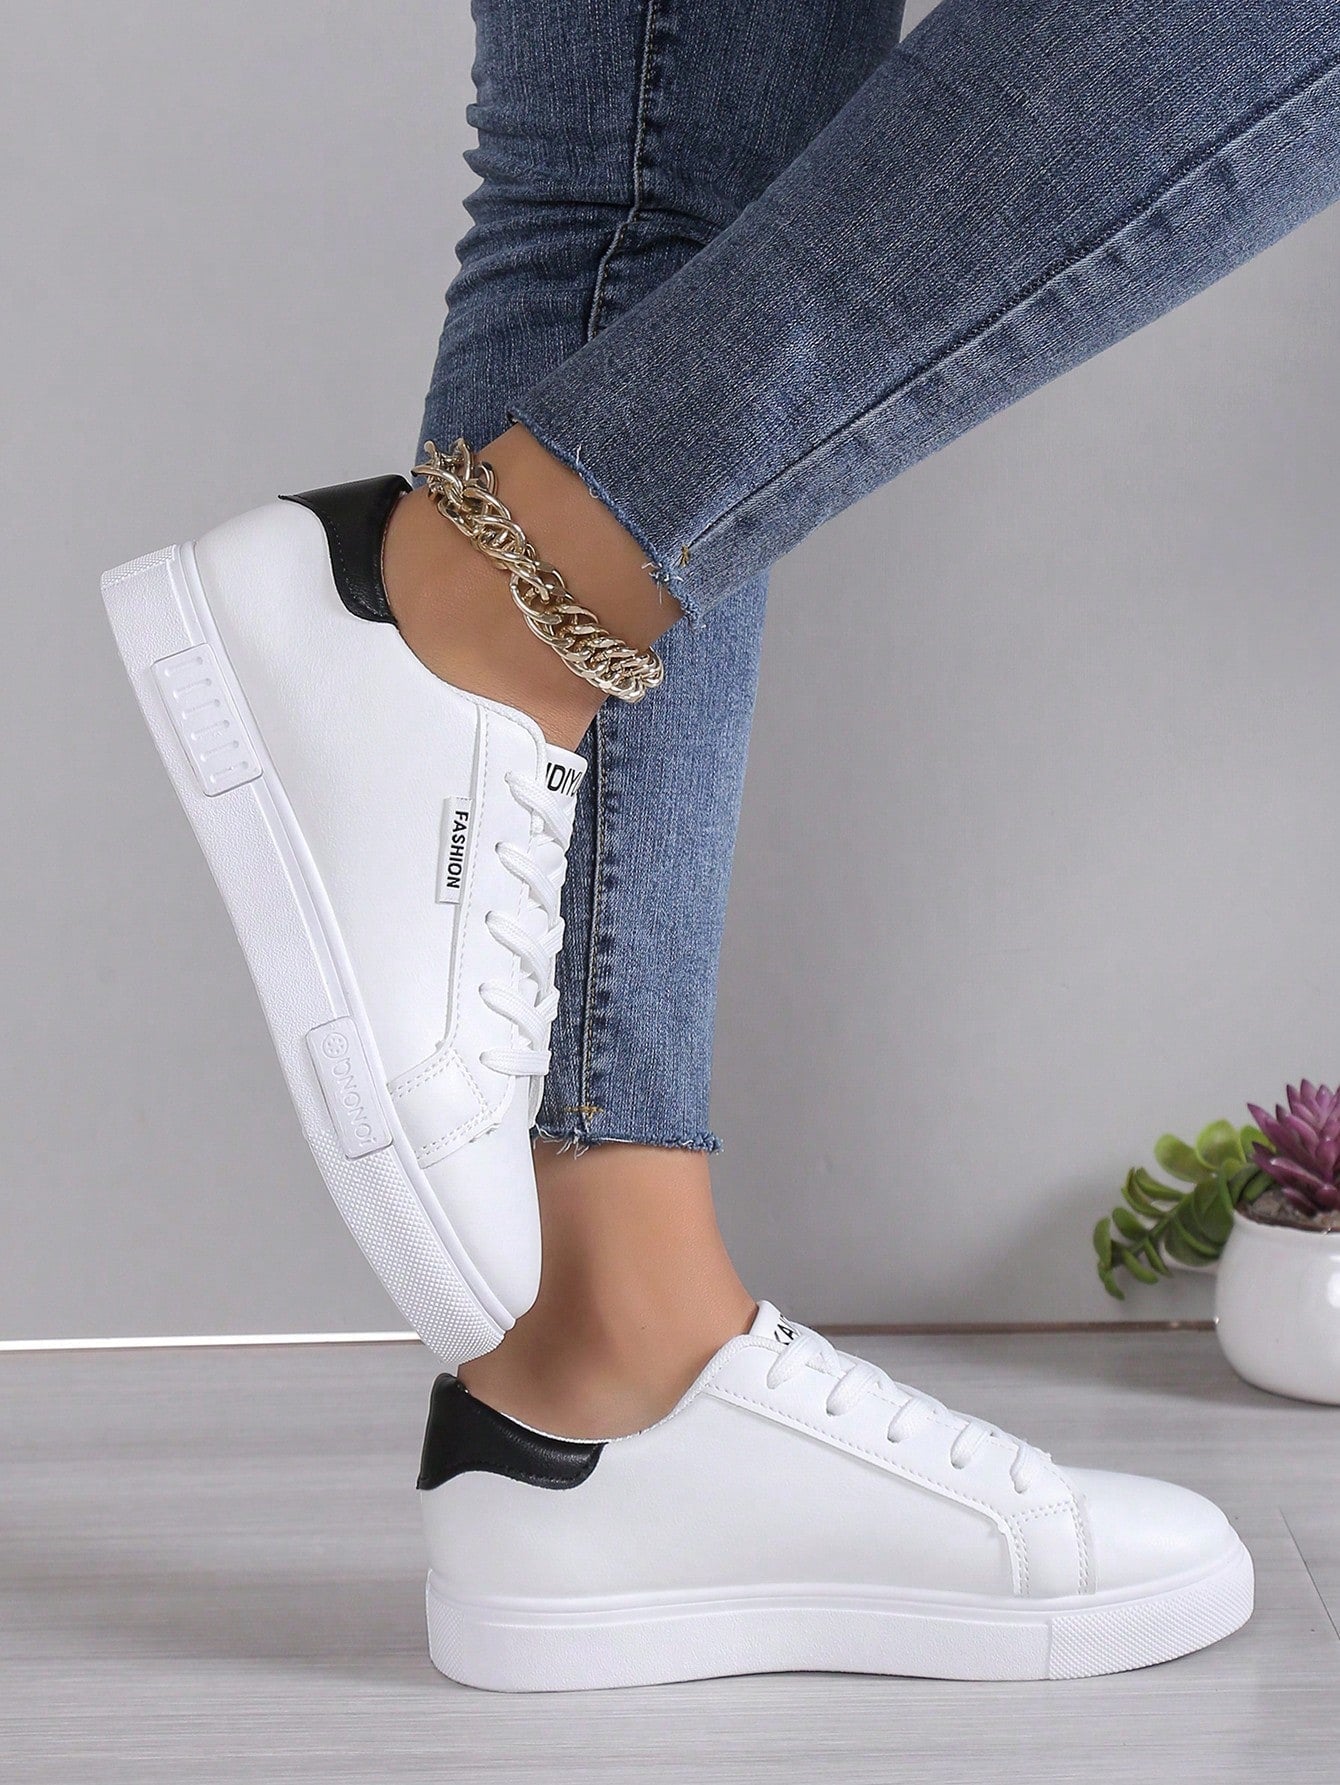 Women's White British Style Lace-up Sport Shoes, Round Toe Low Top Flat Skateboard Sneakers, Fashionable Breathable Slip Resistant Casual Shoes For Students